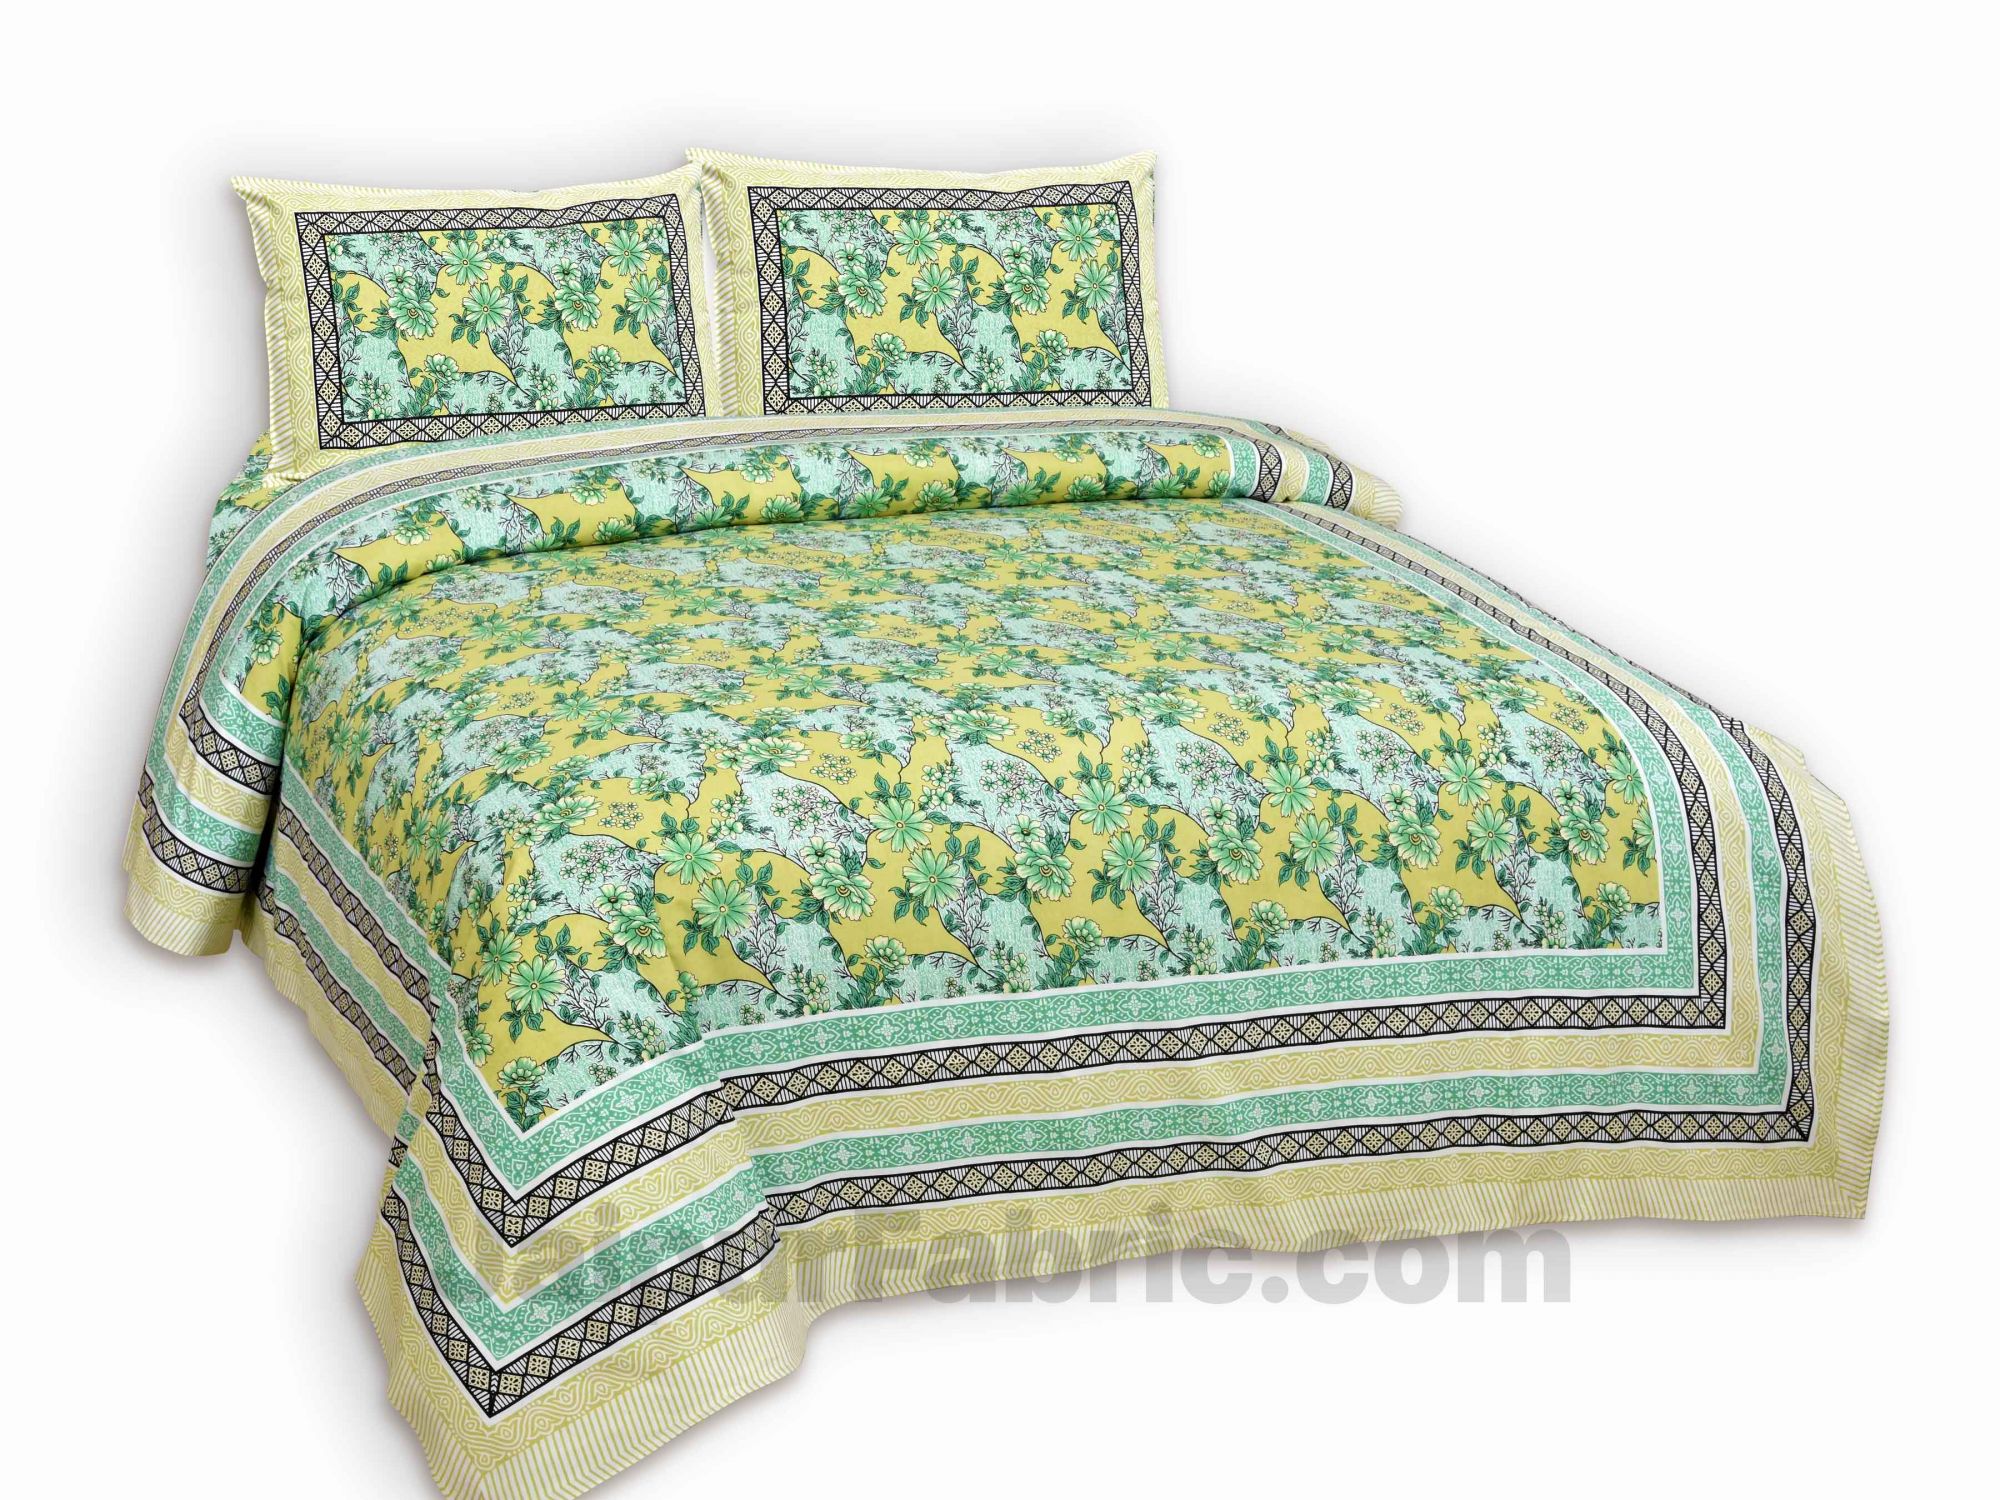 Green Lime Floral Pure Cotton Double Bedsheet